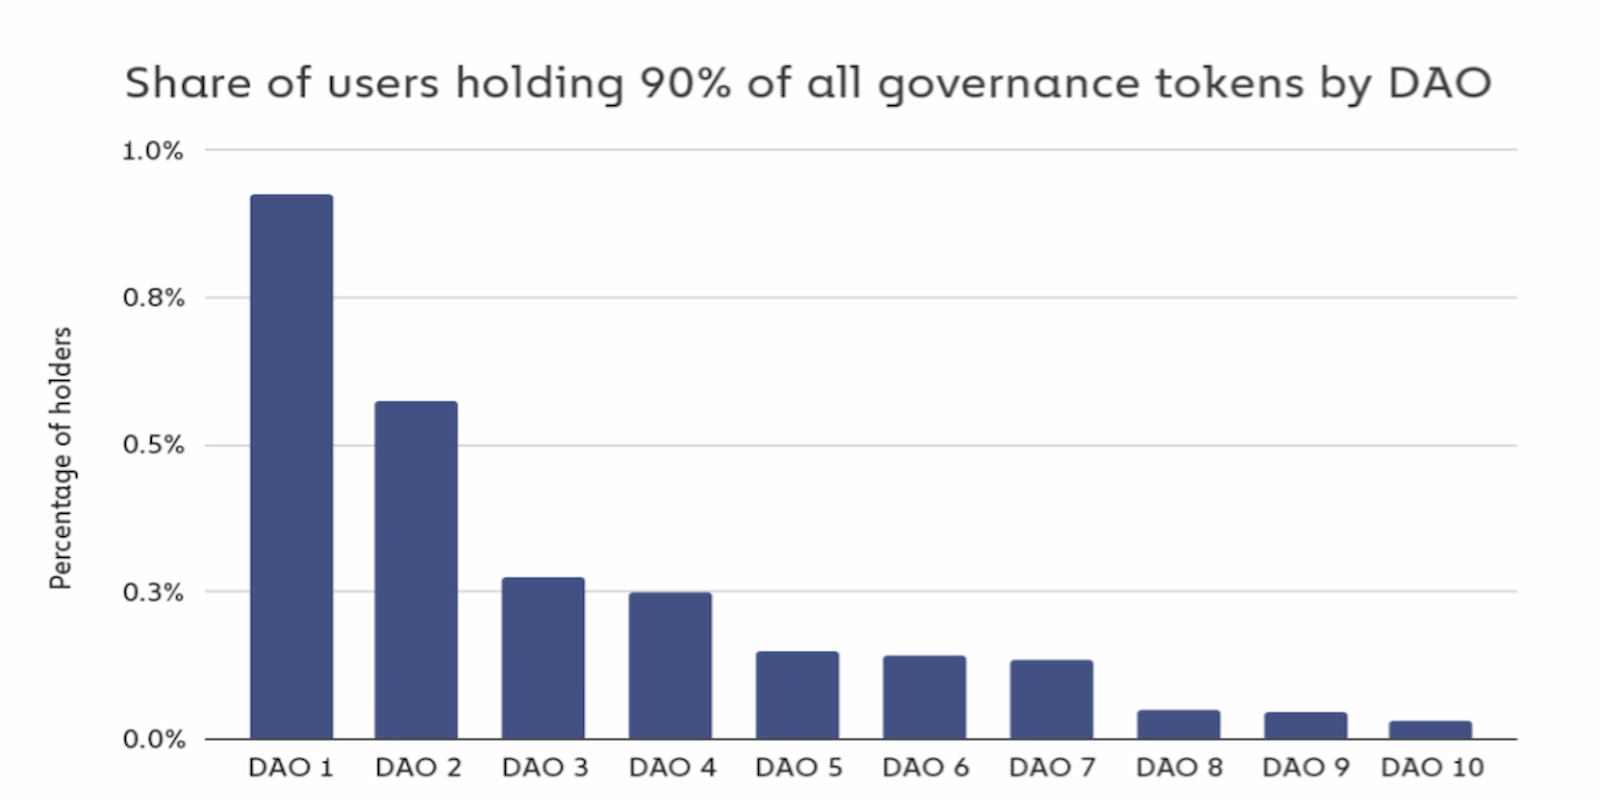 Less than 1% of voters hold 90% of governance tokens across 10 DAOs.